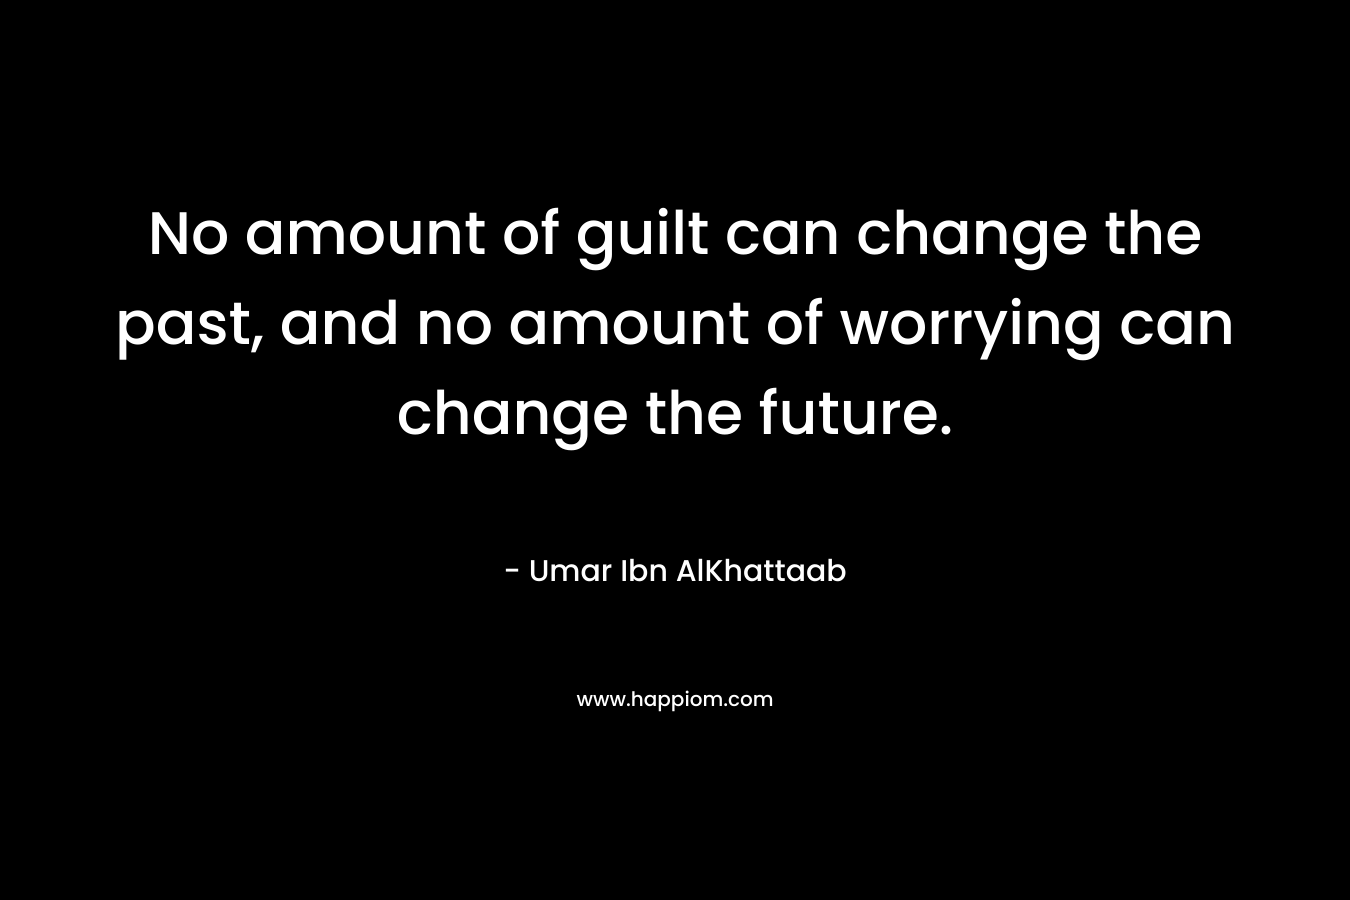 No amount of guilt can change the past, and no amount of worrying can change the future. – Umar Ibn AlKhattaab